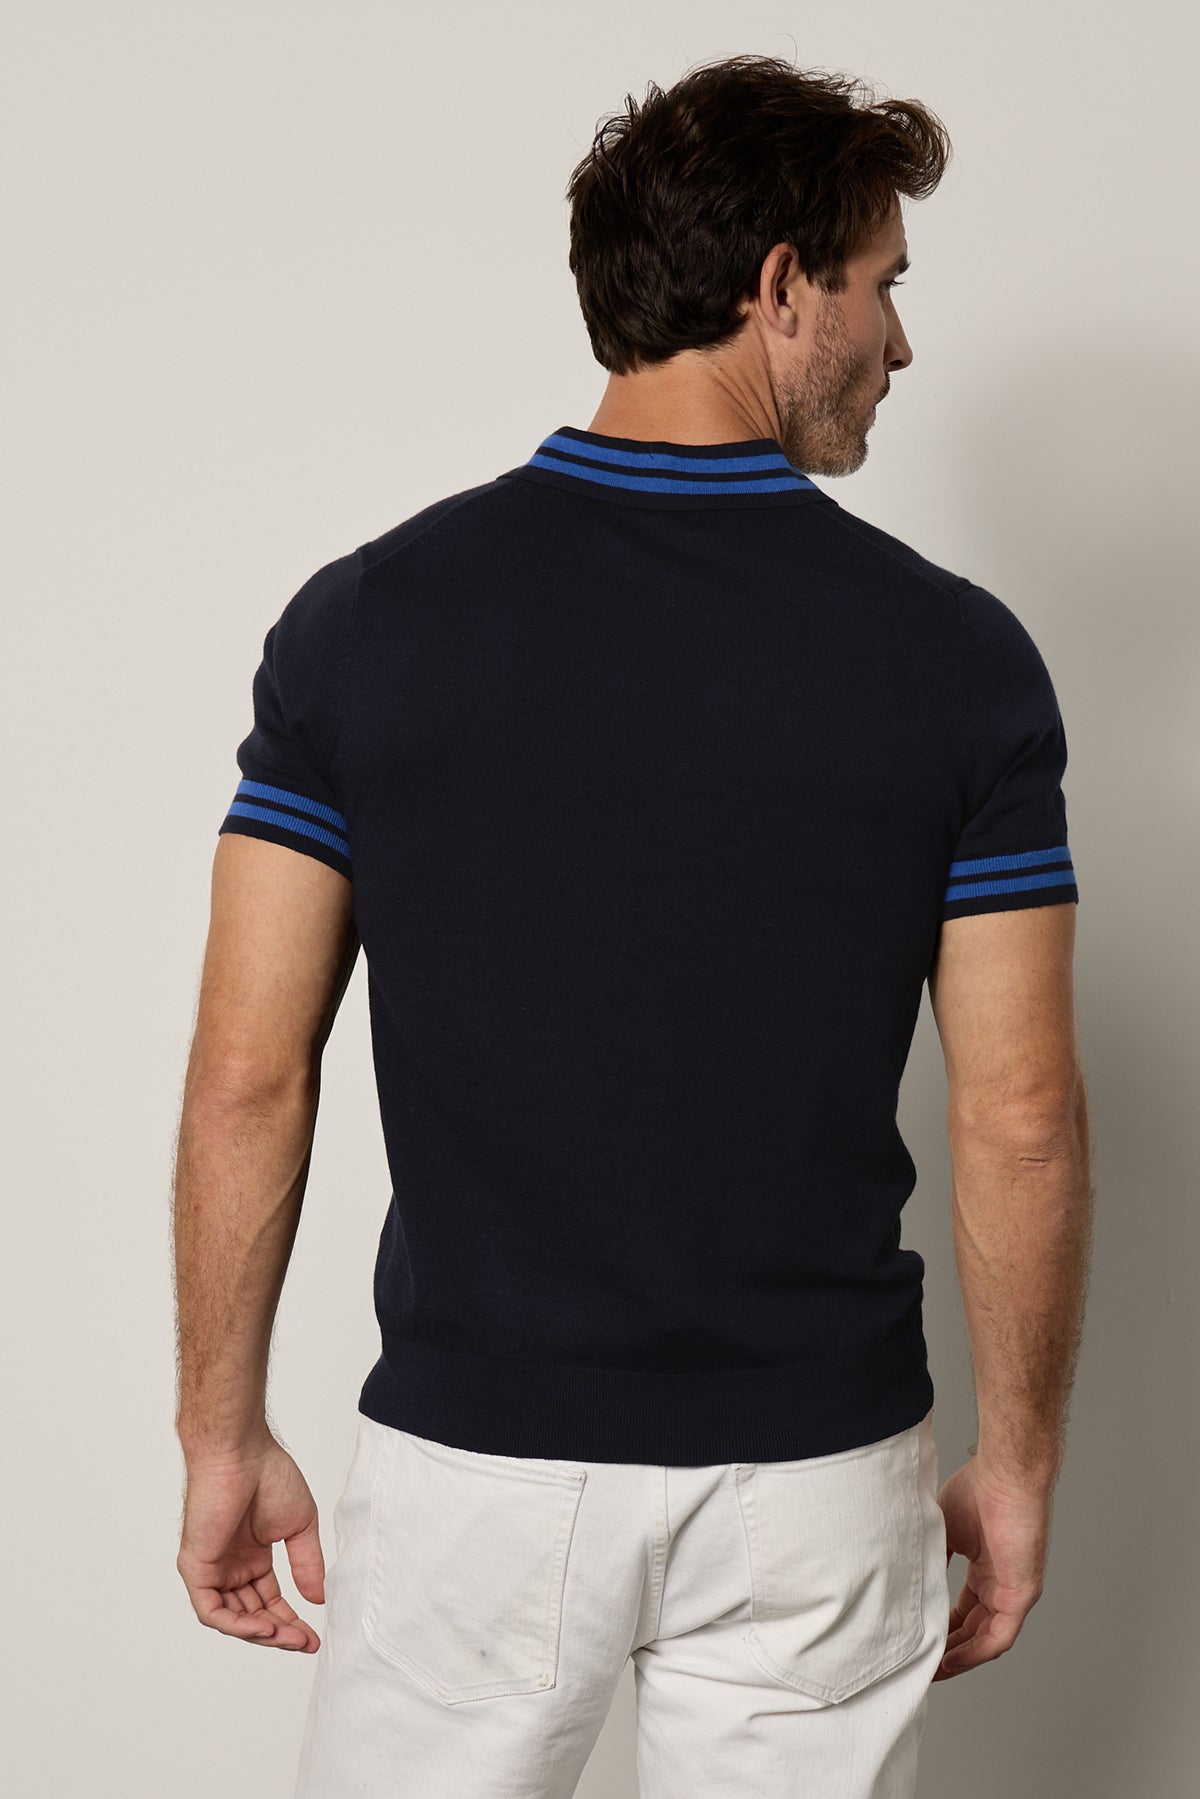 Hogan Polo in navy linen blend with double stripes on collar and sleeves with white denim back-26249278554305